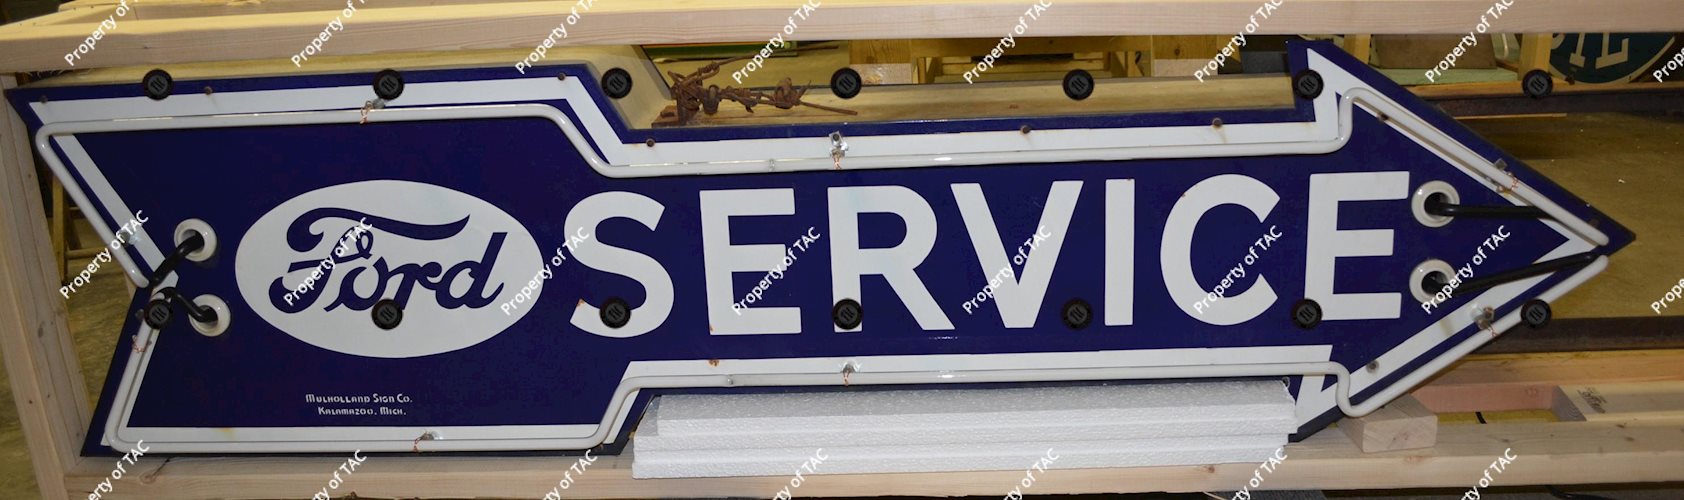 Ford in Oval Service Neon Porcelain Arrow Sign